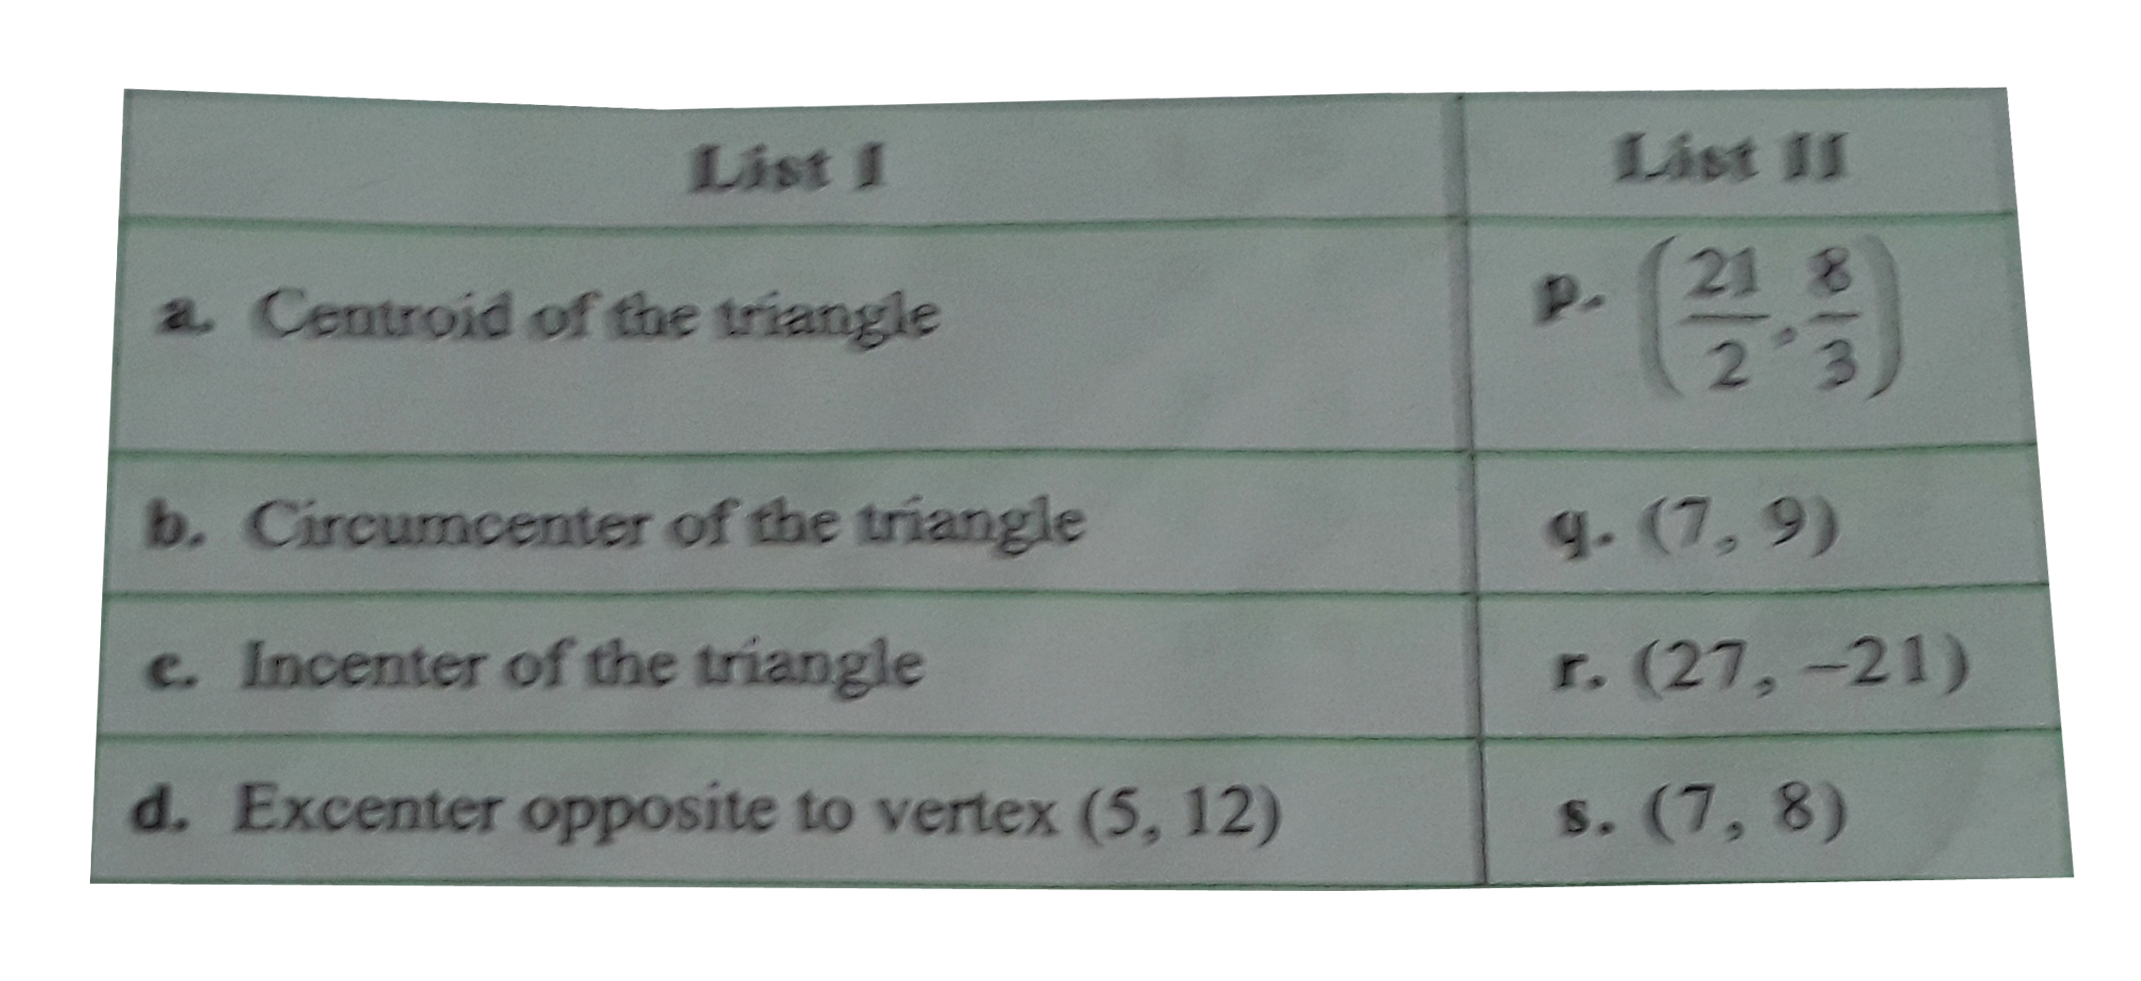 Consider the triangle whose vetices are (0,0) , (5,12) and (16,12).